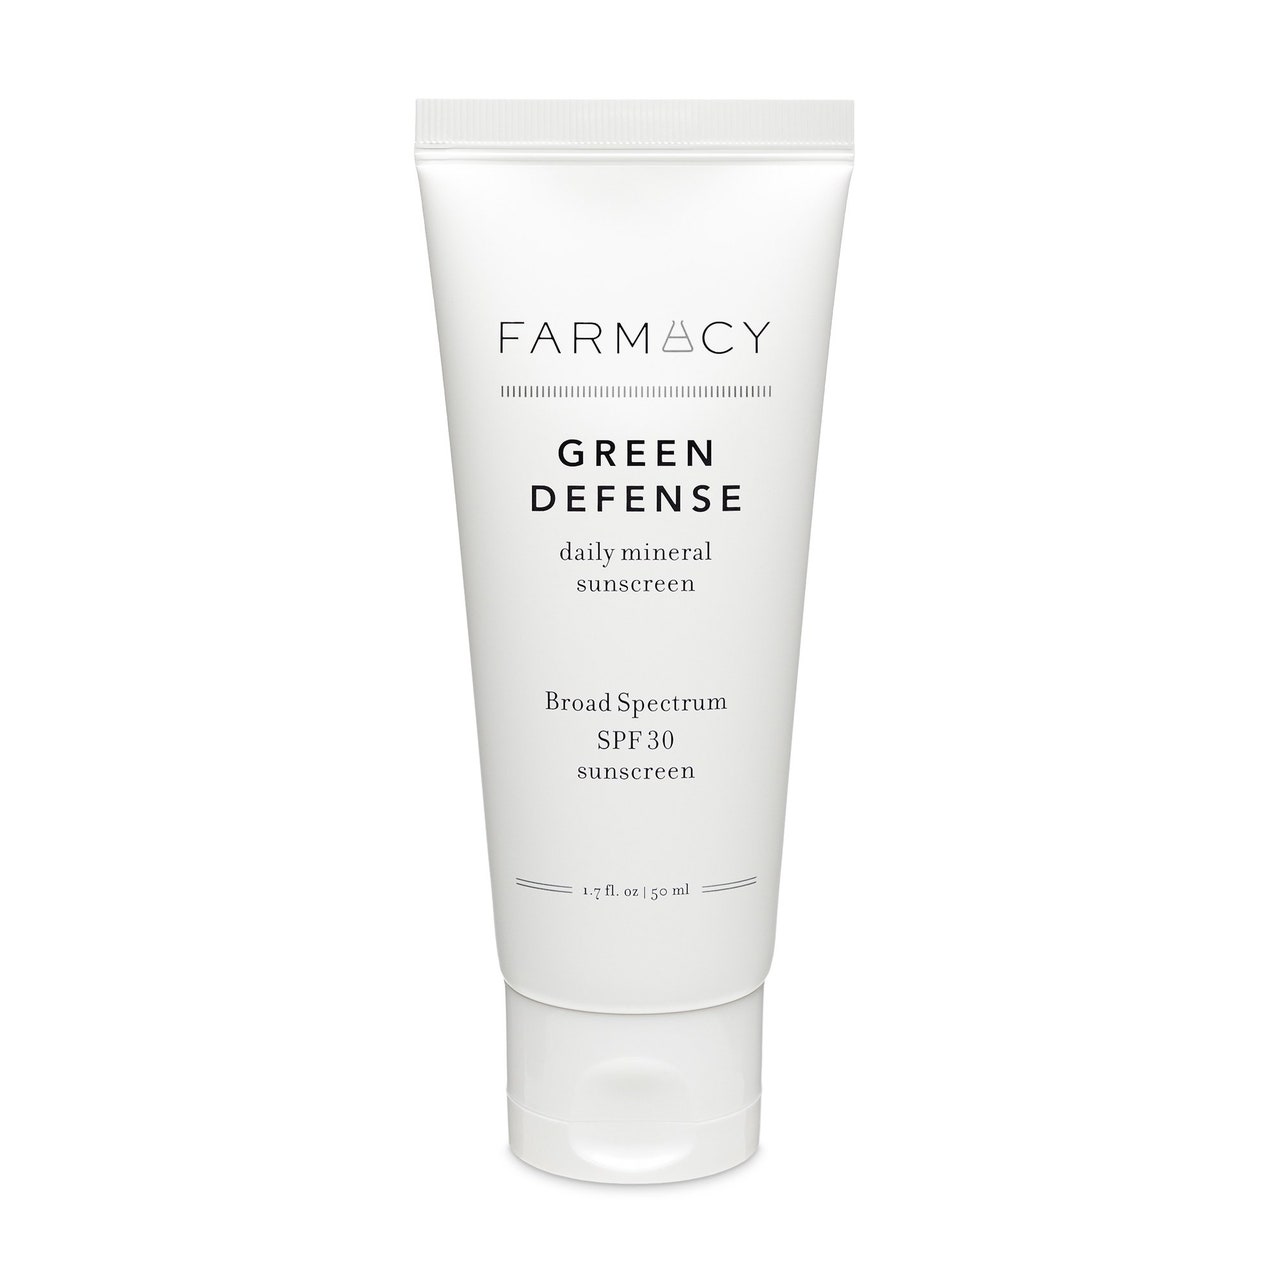 A white bottle of Farmacy Green Defense Daily Sunscreen SPF 30 on white background